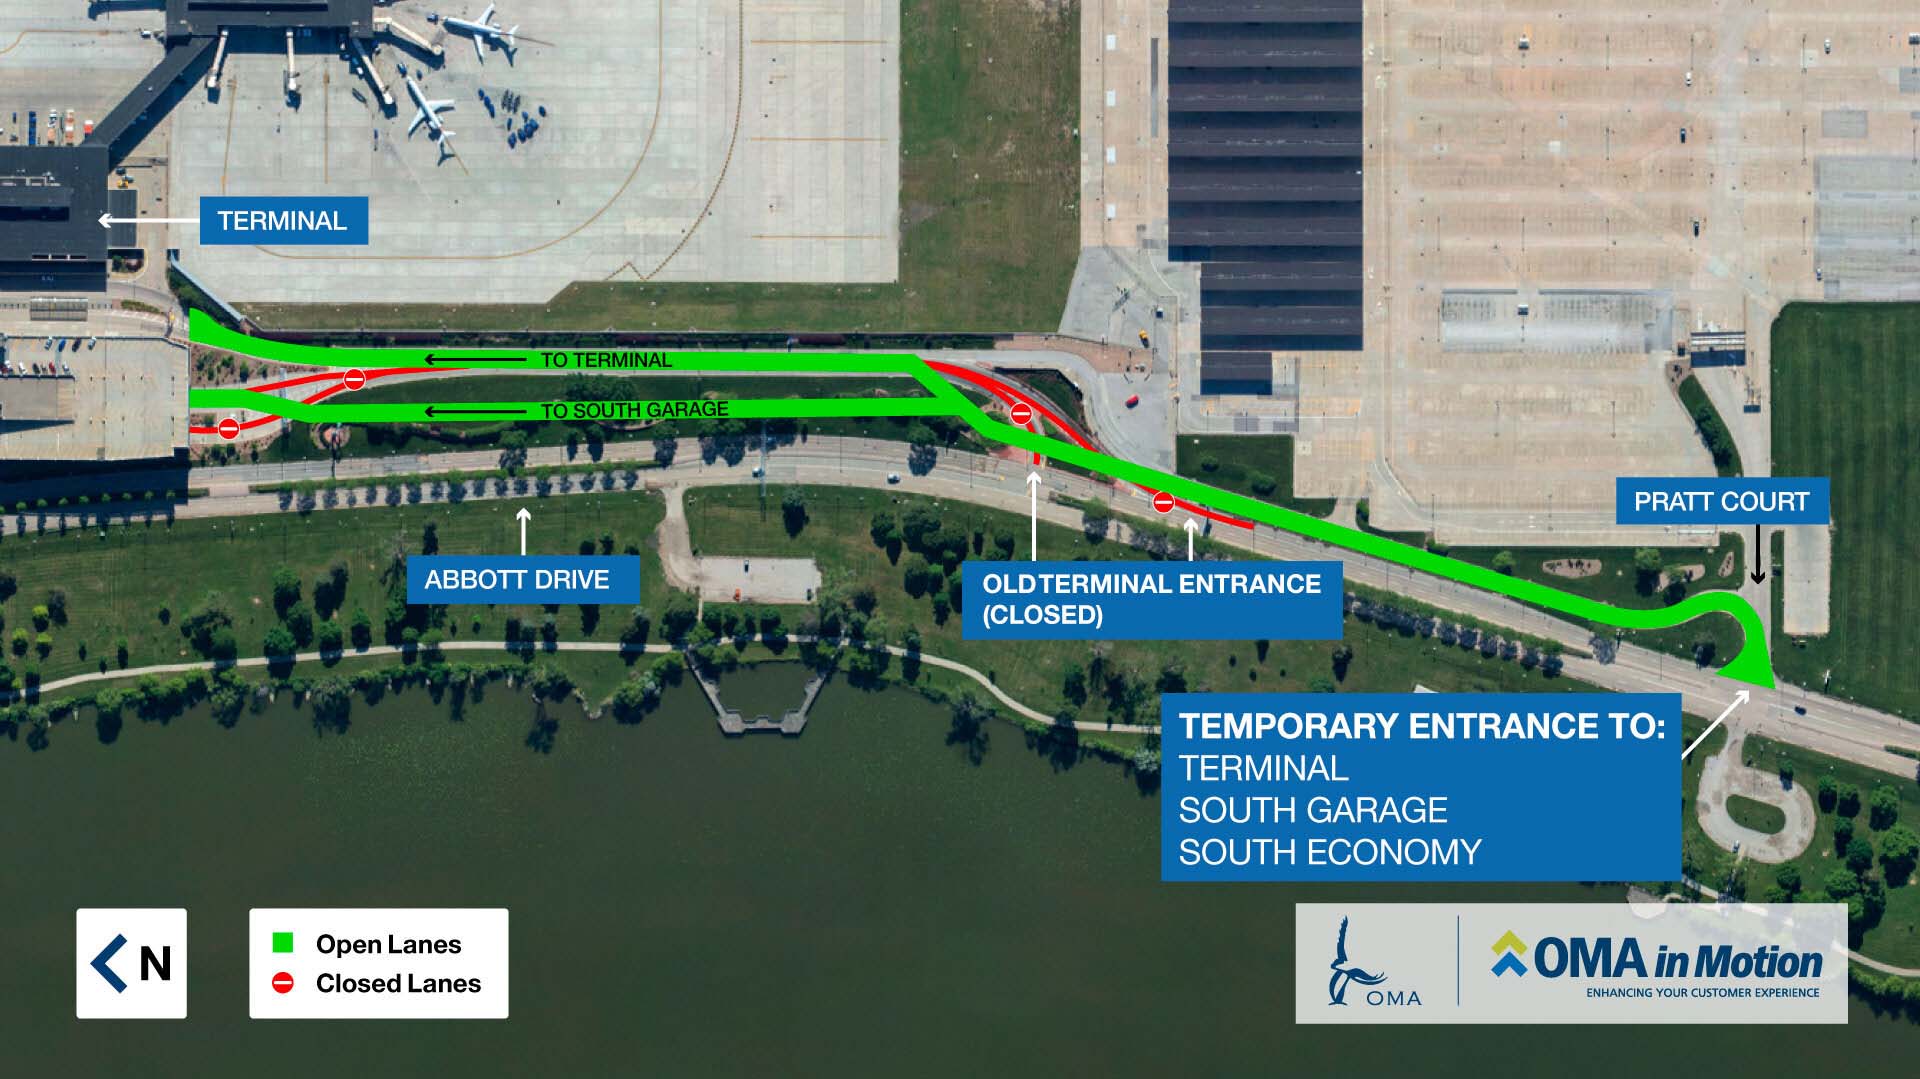 An overhead map showing what lanes are closed and open along the terminal and south garage entrance.